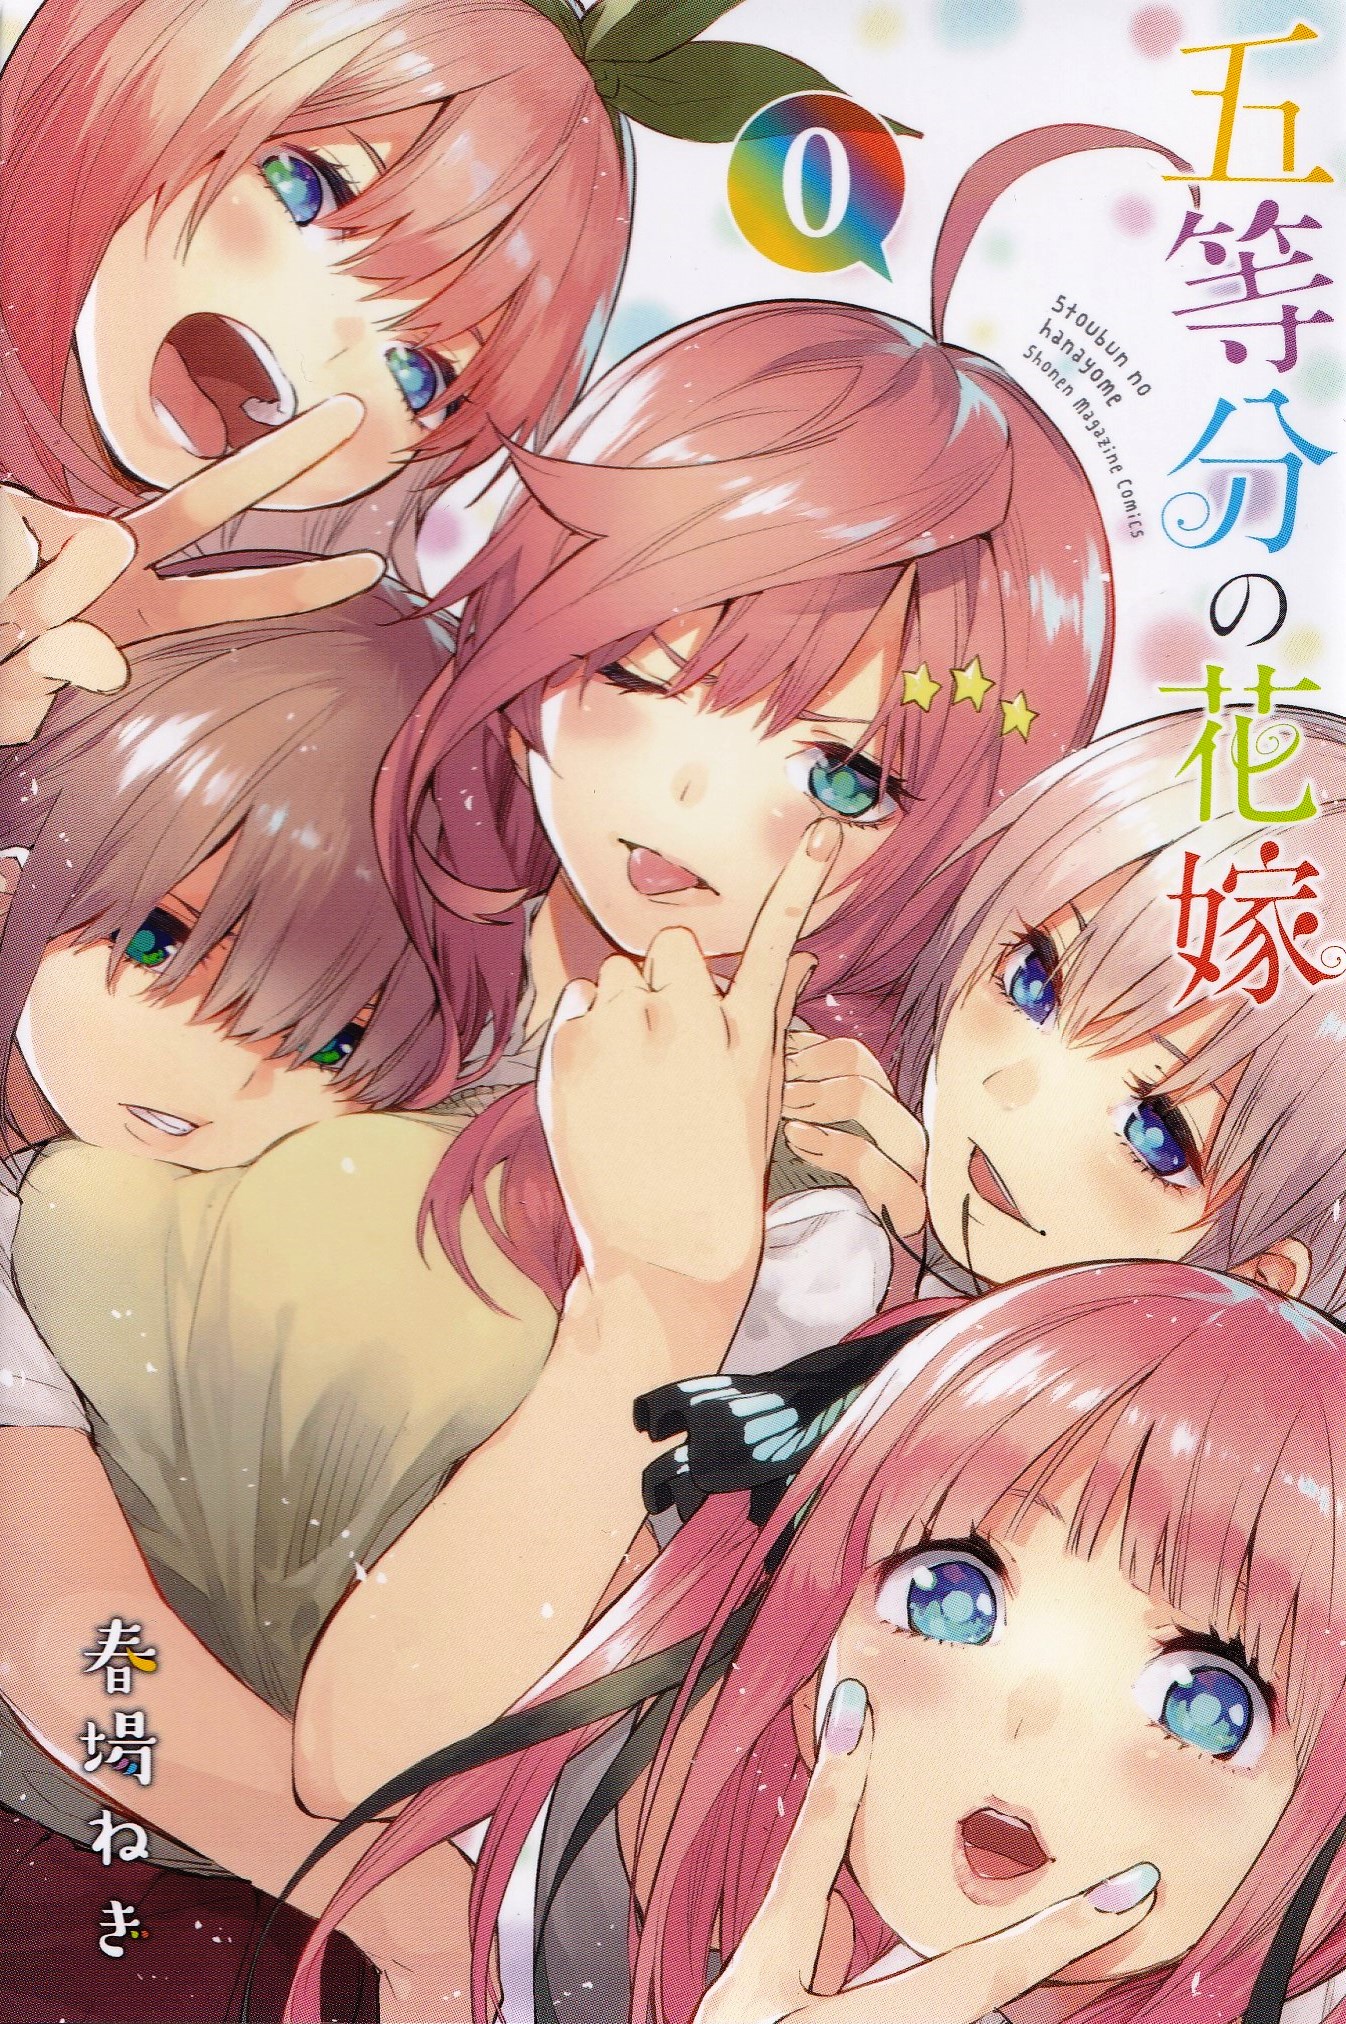 The Quintessential Quintuplets - Full Color Edition cover